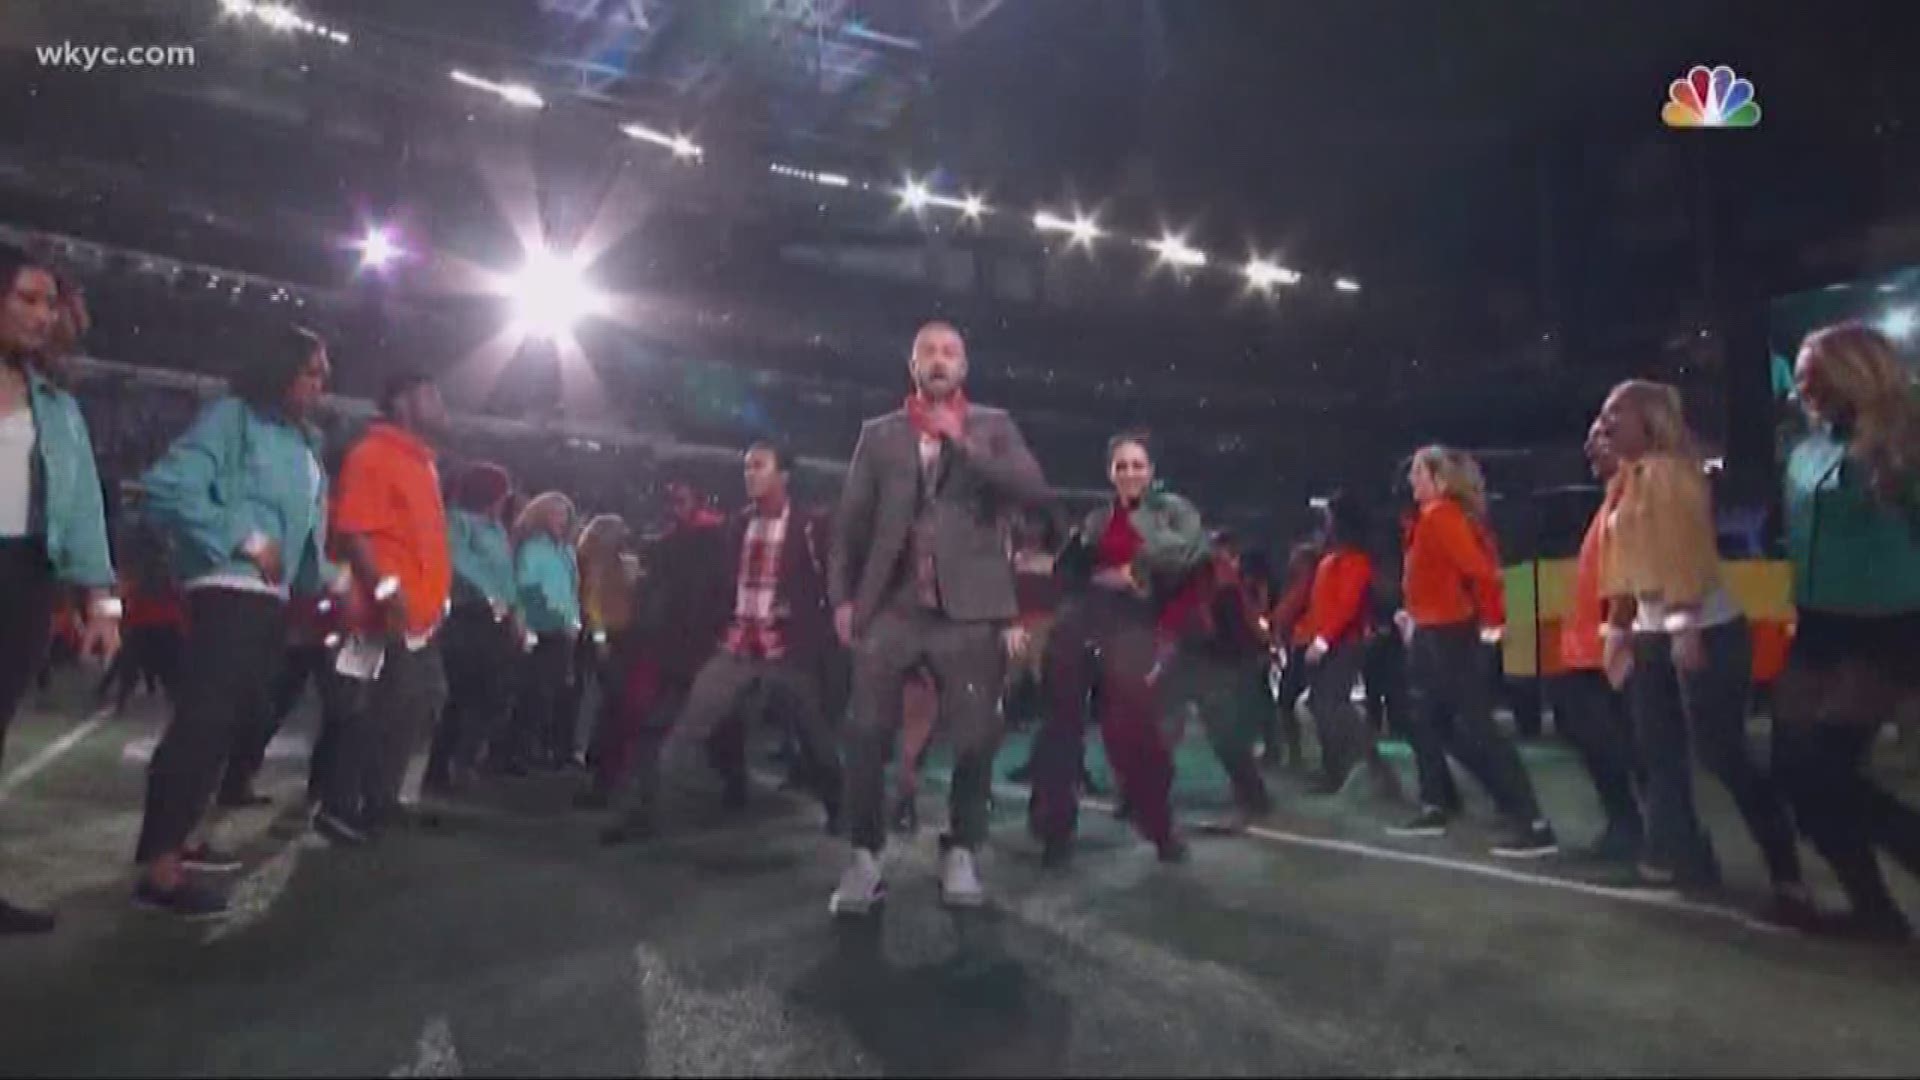 Justin Timberlake expands tour with 2nd stop in Cleveland